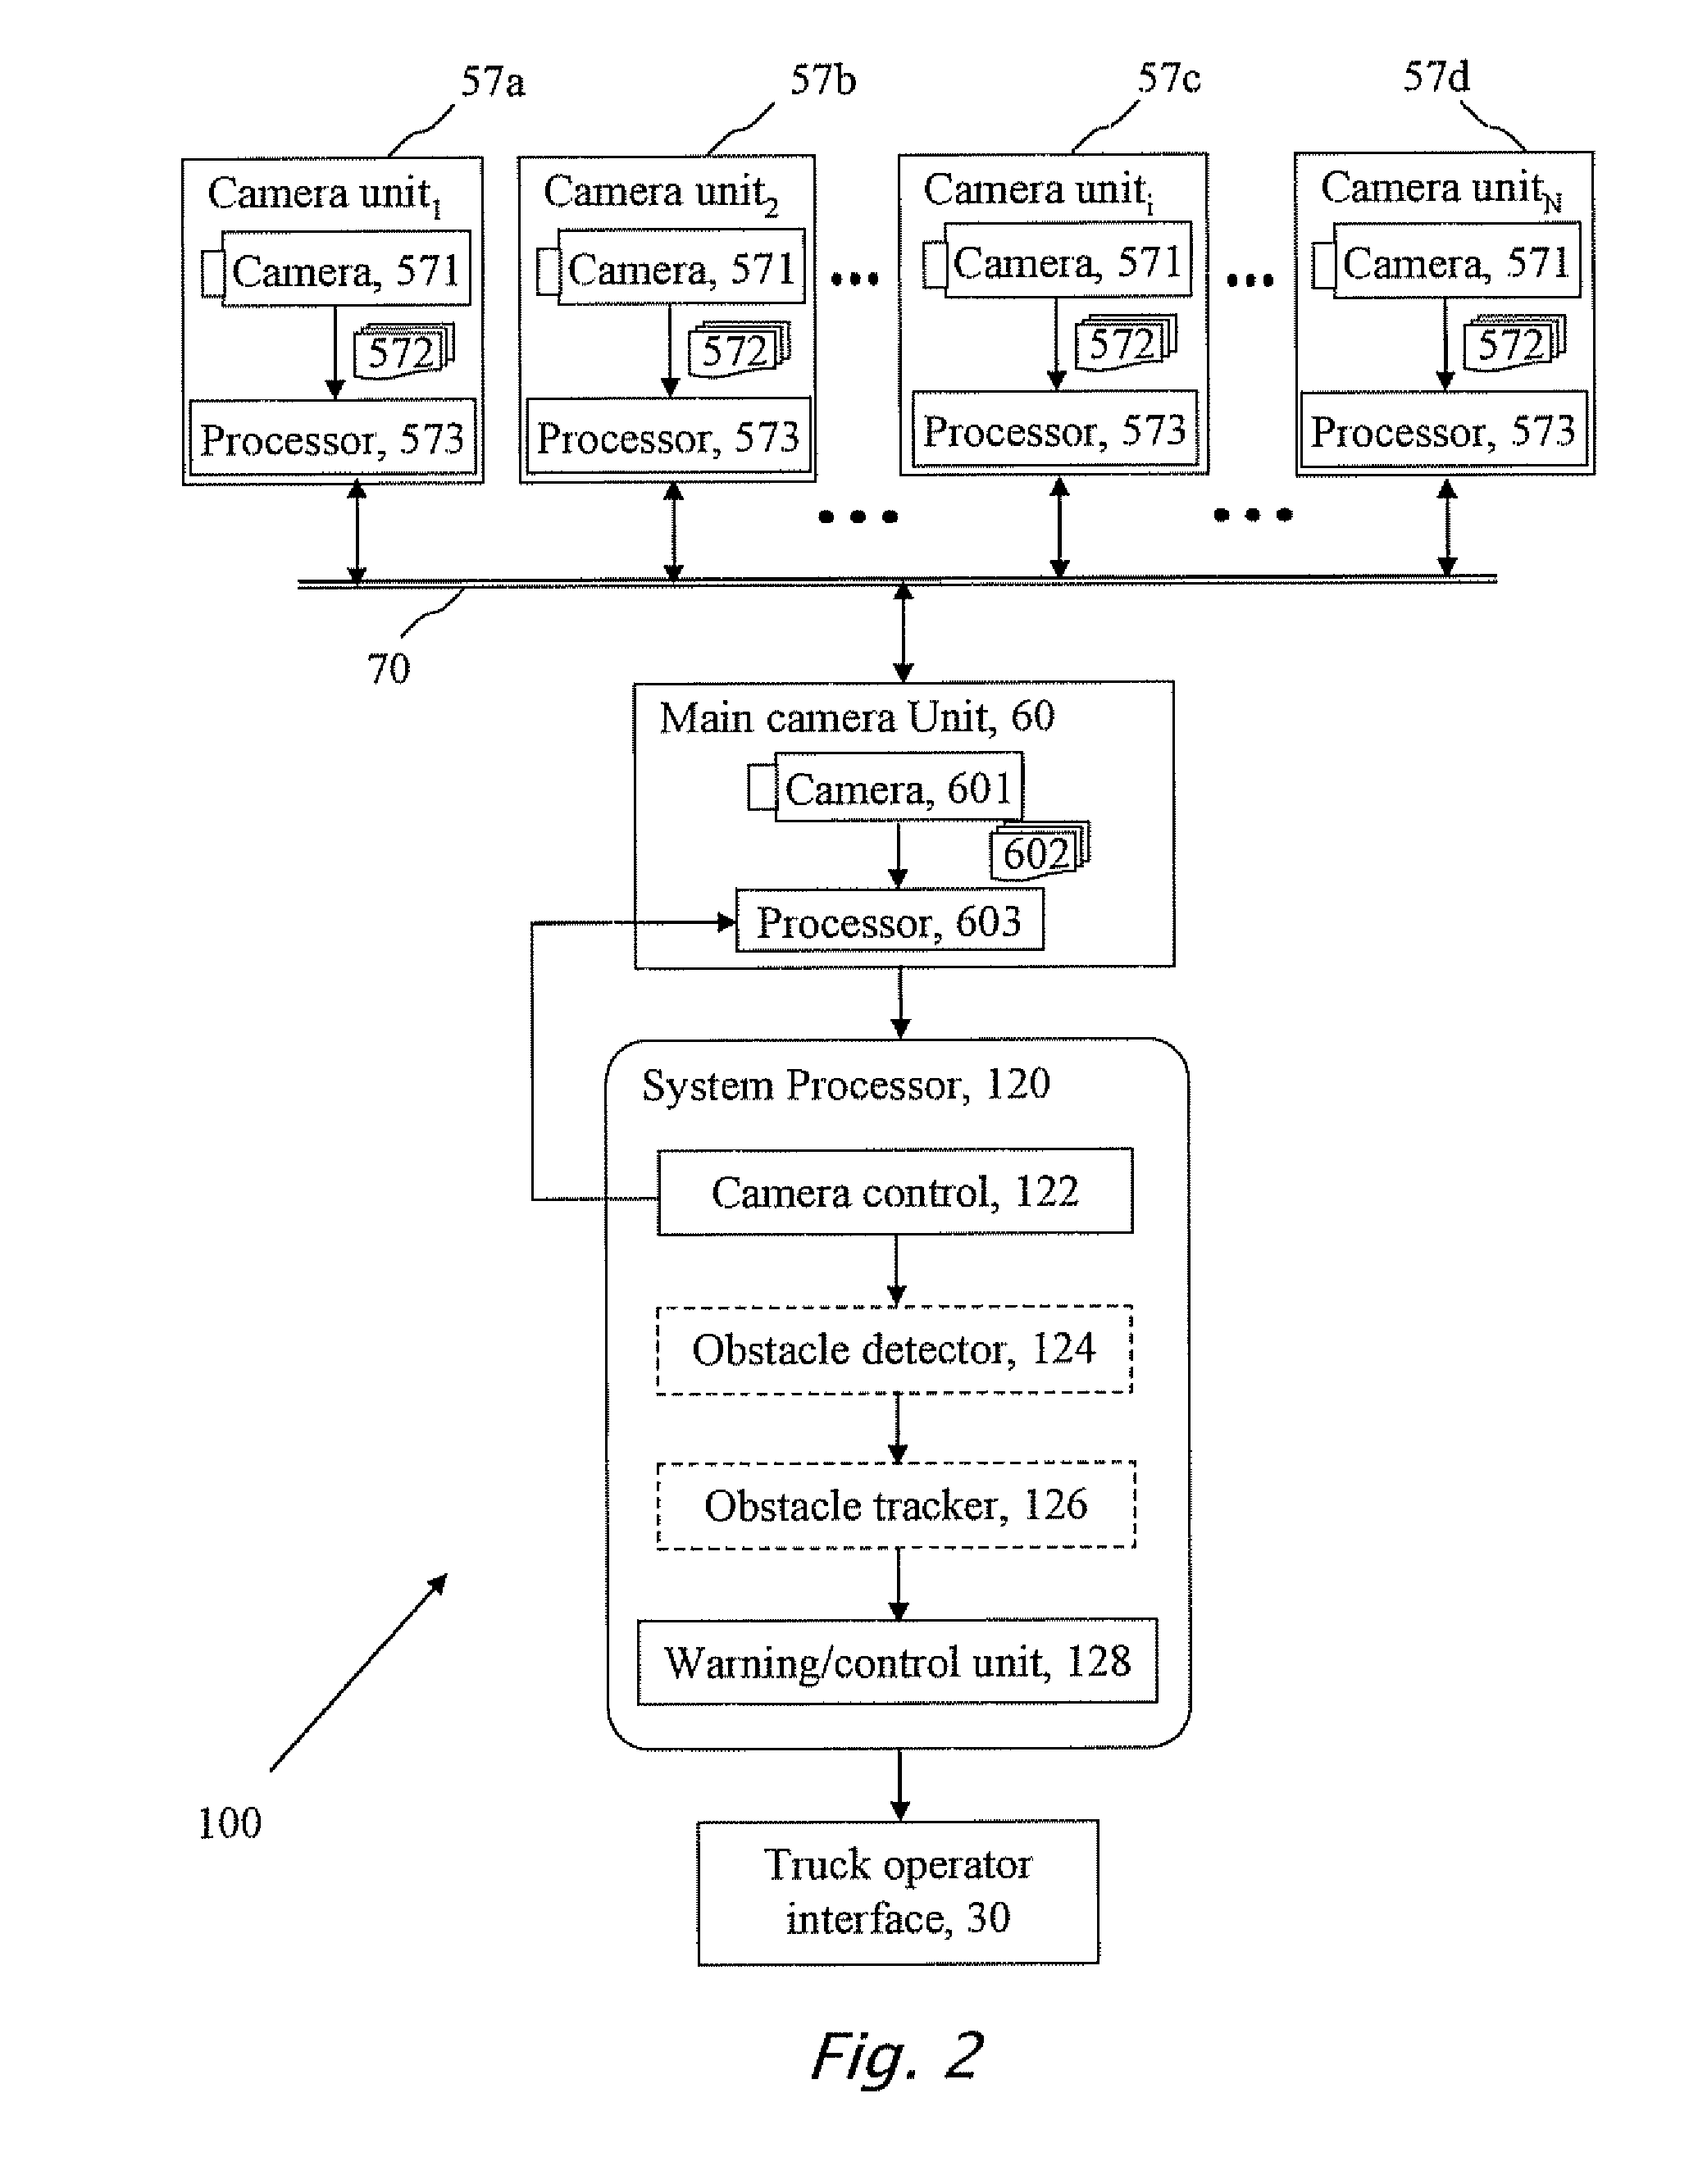 Systems And Methods For Detecting Pedestrians In The Vicinity Of A Powered Industrial Vehicle